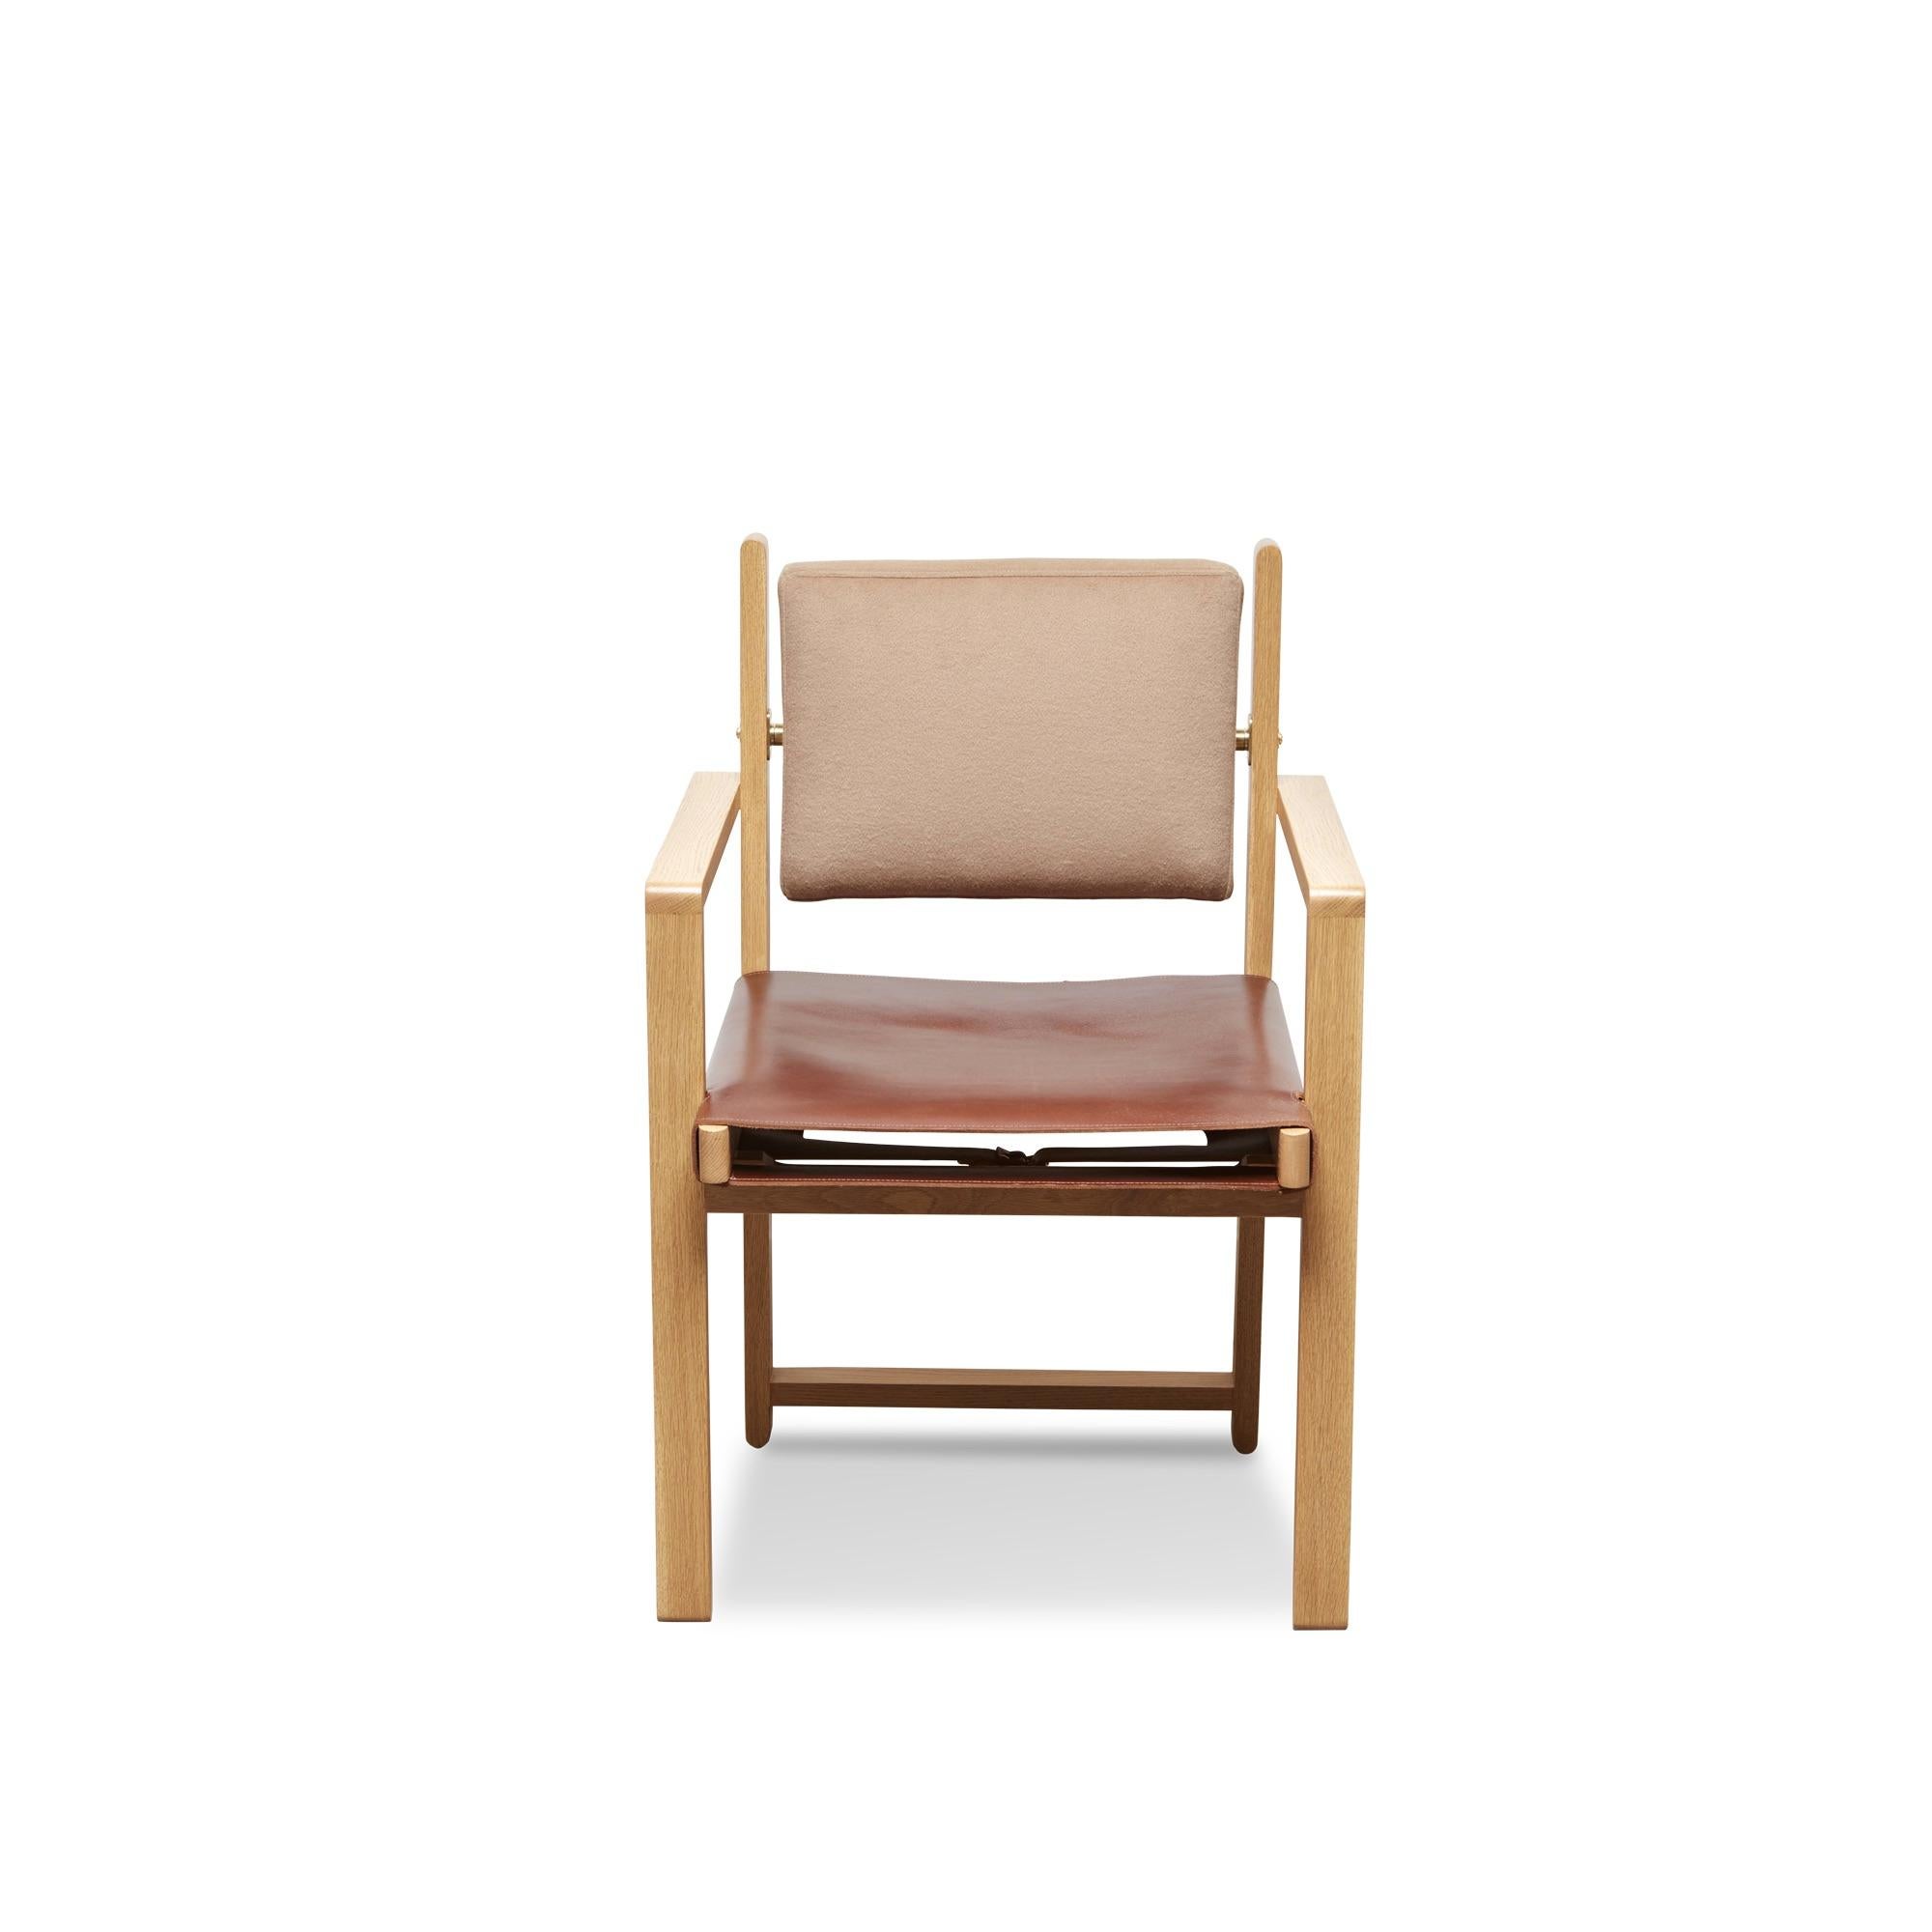 The Morro dining chair is made from a solid American walnut or white oak frame and features an upholstered back cushion and a leather sling seat. An optional loose seat cushion is also available.

The Lawson-Fenning Collection is designed and